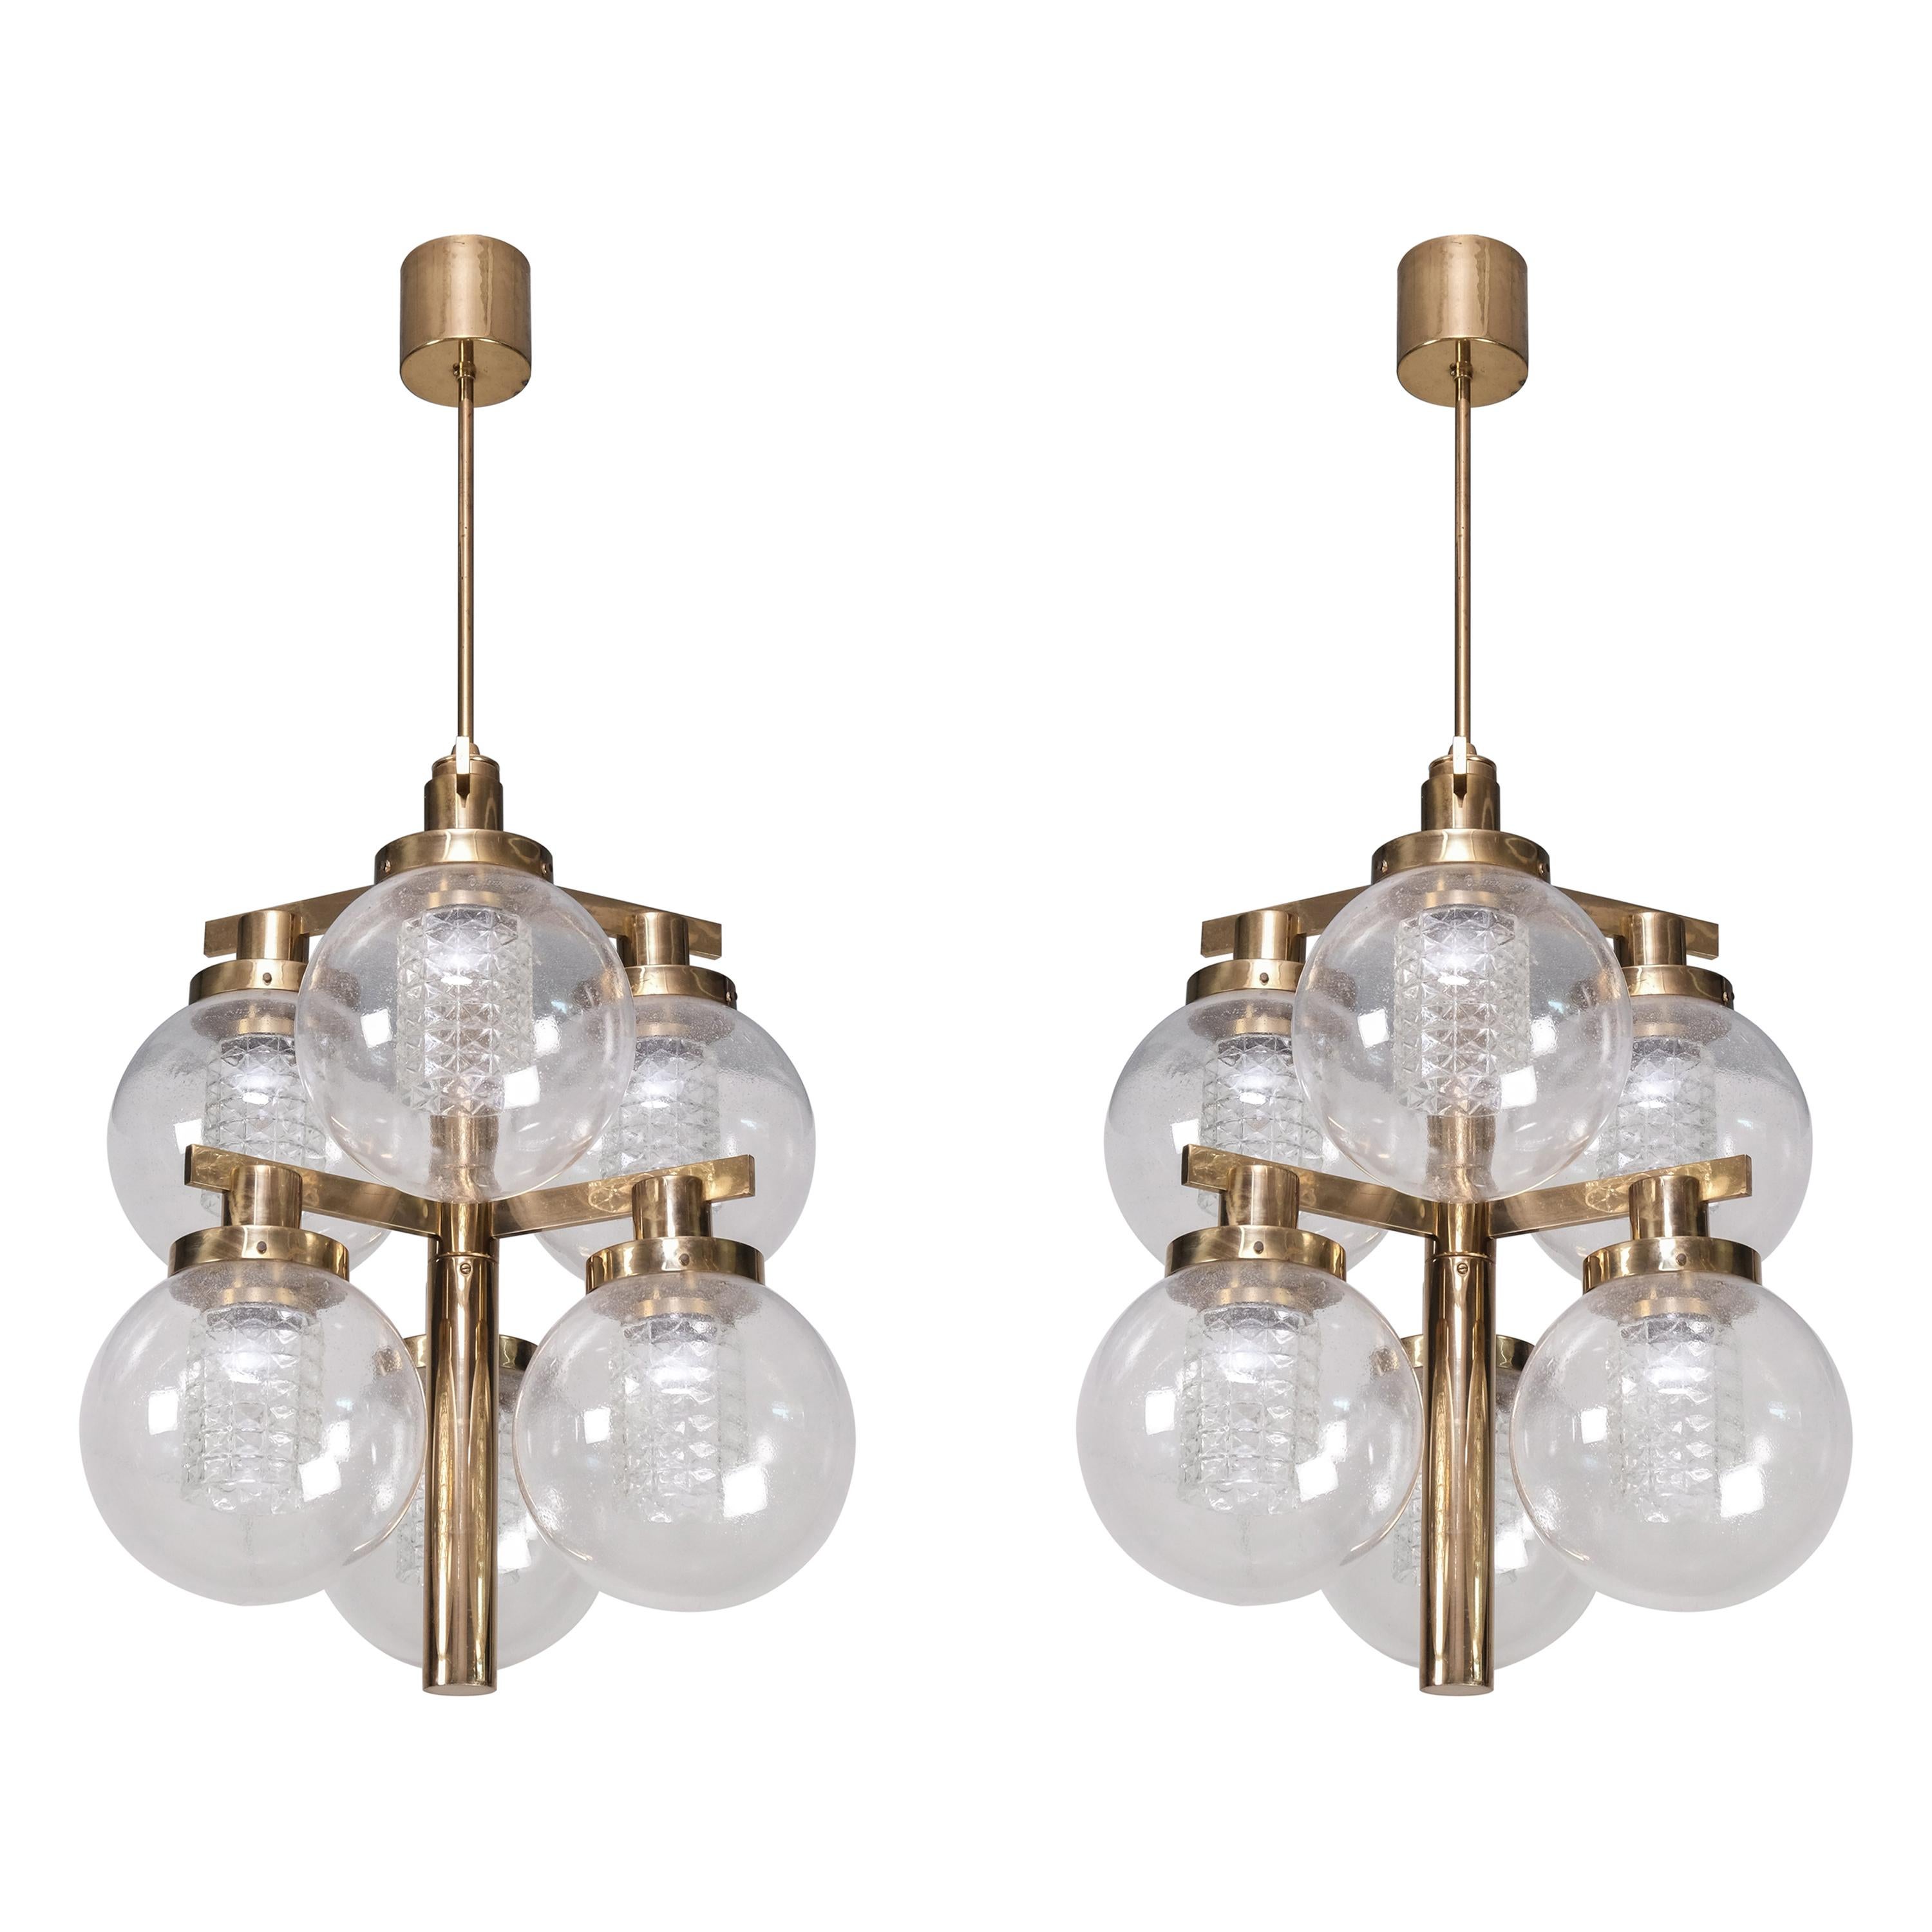 Rare Pair of Hans-Agne Jakobsson Brass Chandeliers, 1960s